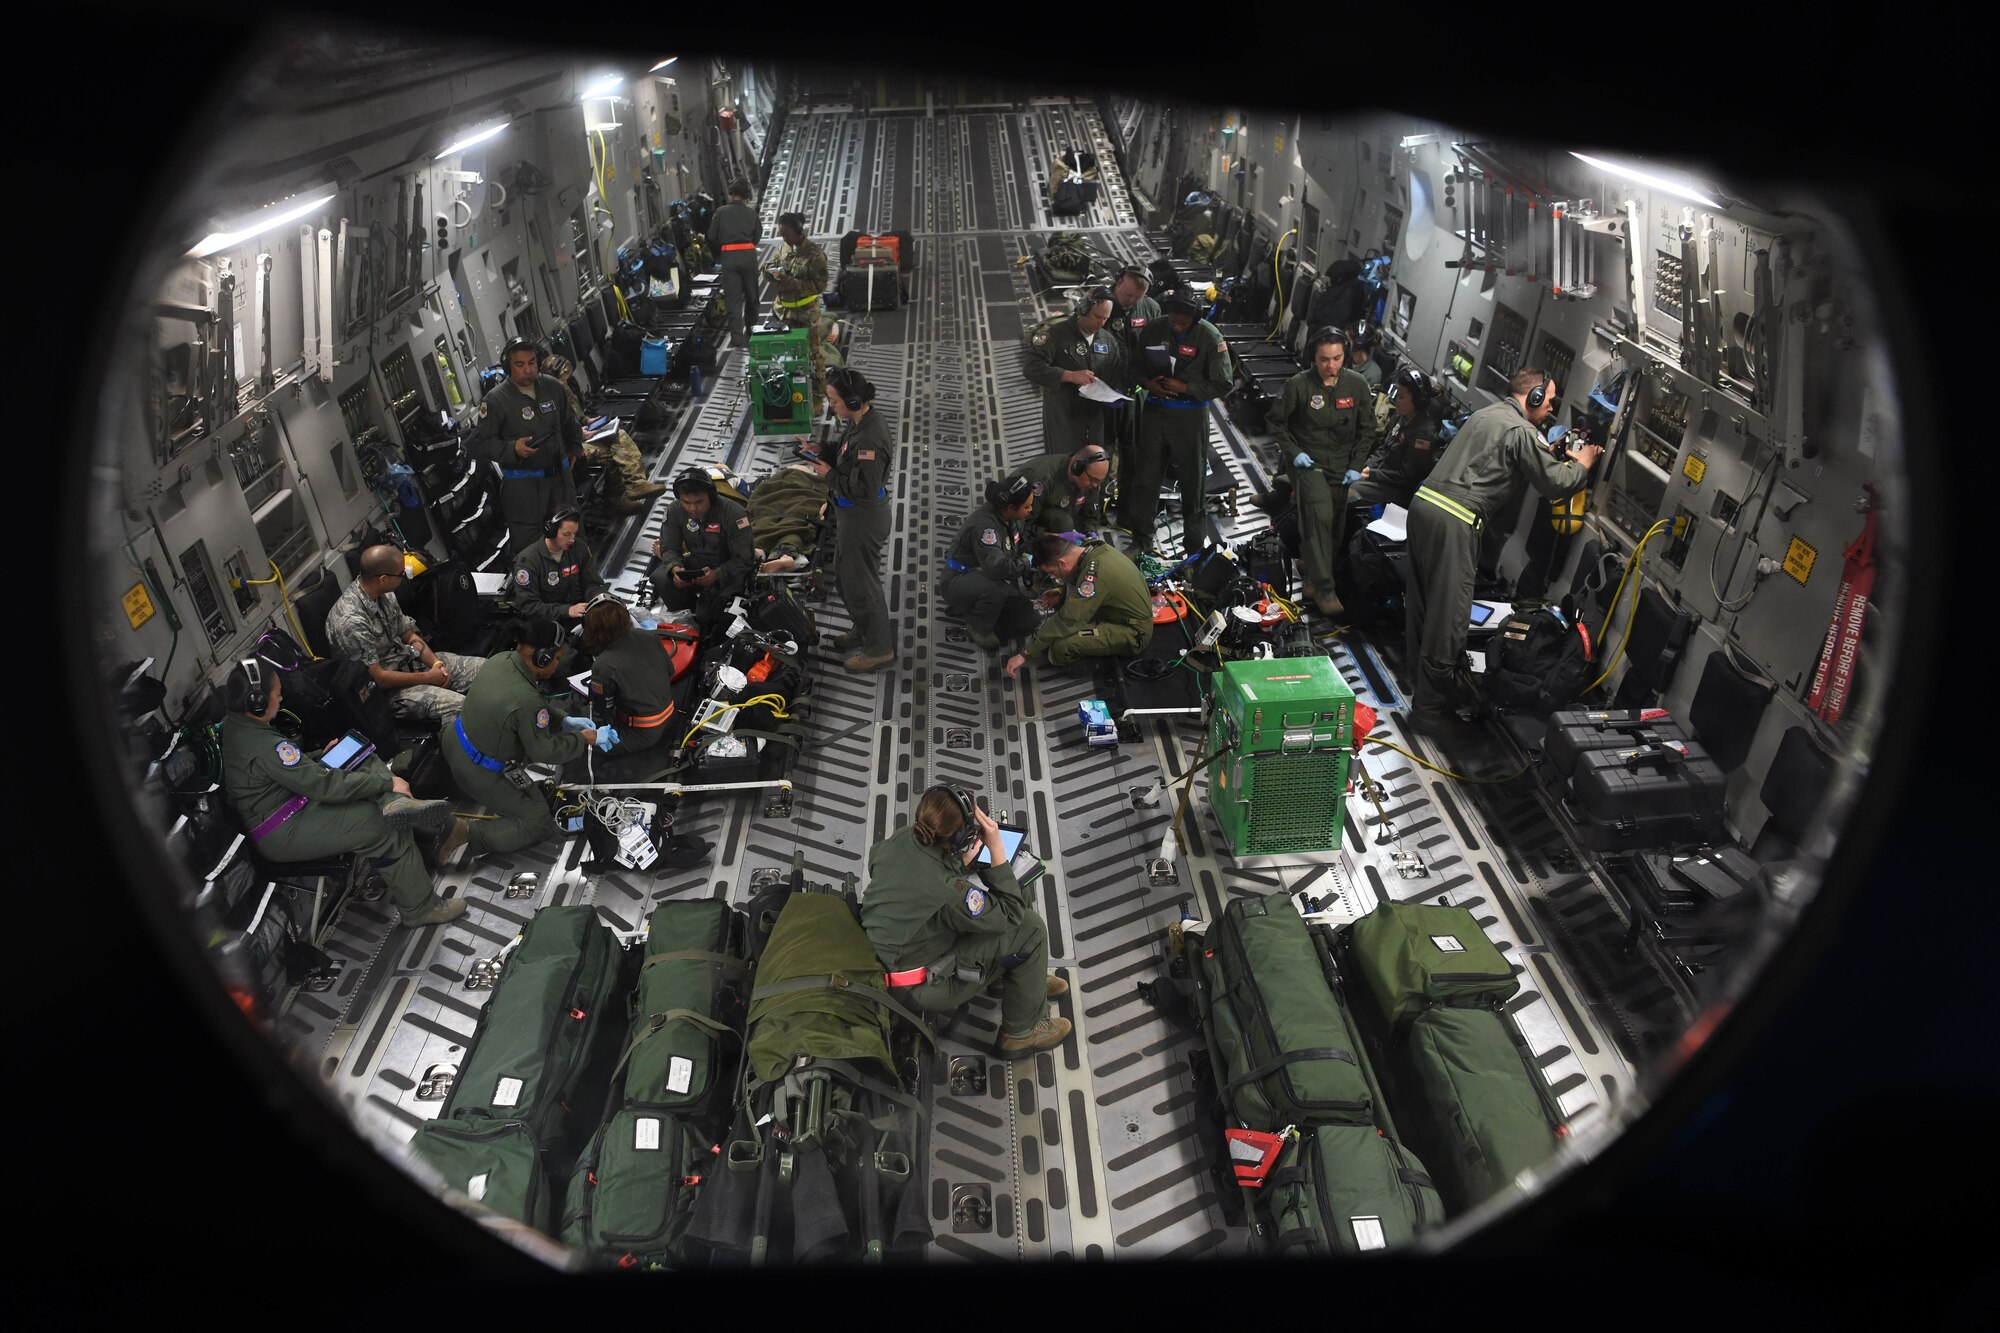 Airmen awaiting evaluation results in aircraft